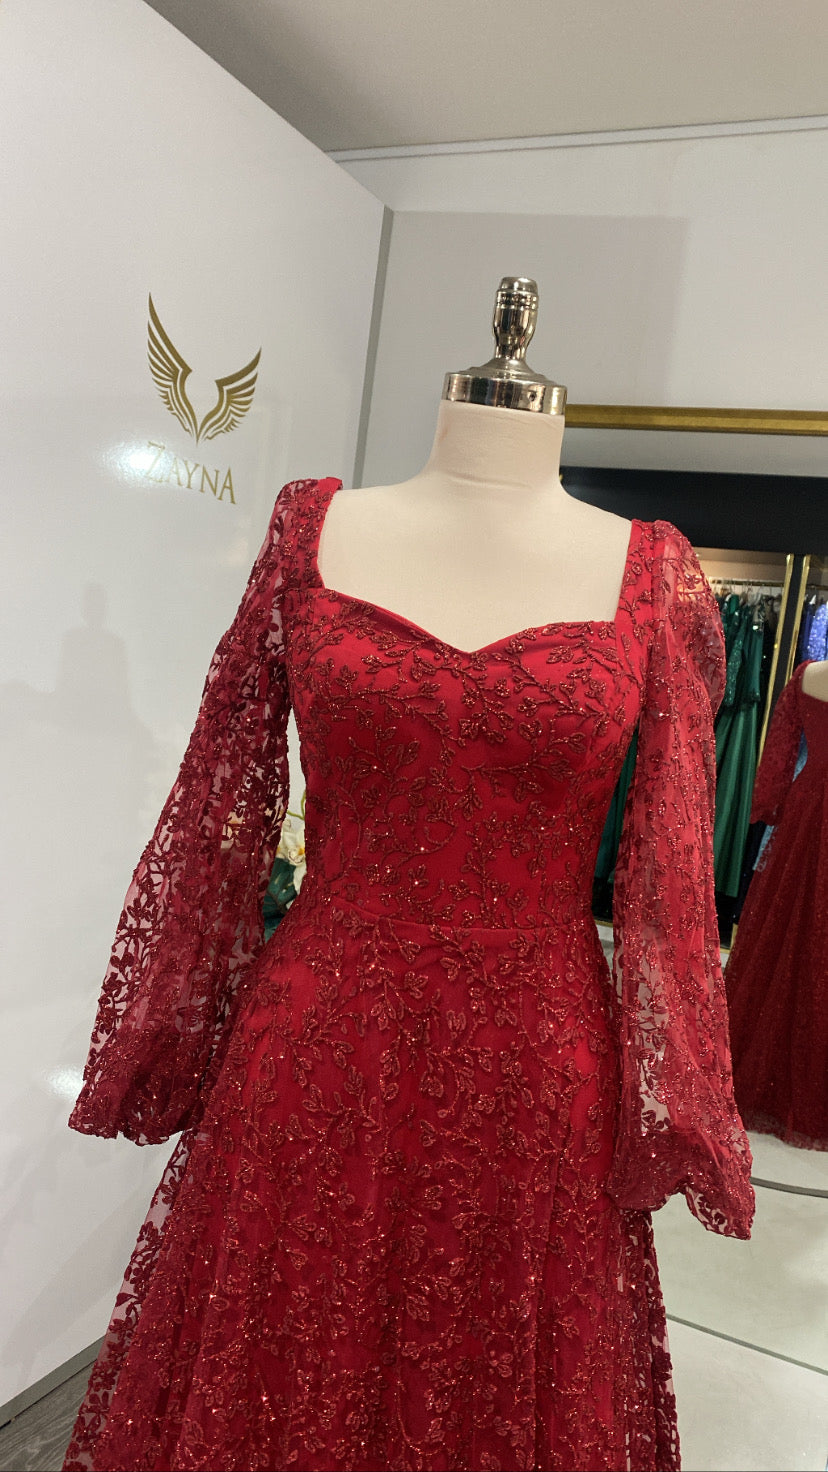 Elegant red dress with flower design and glitter